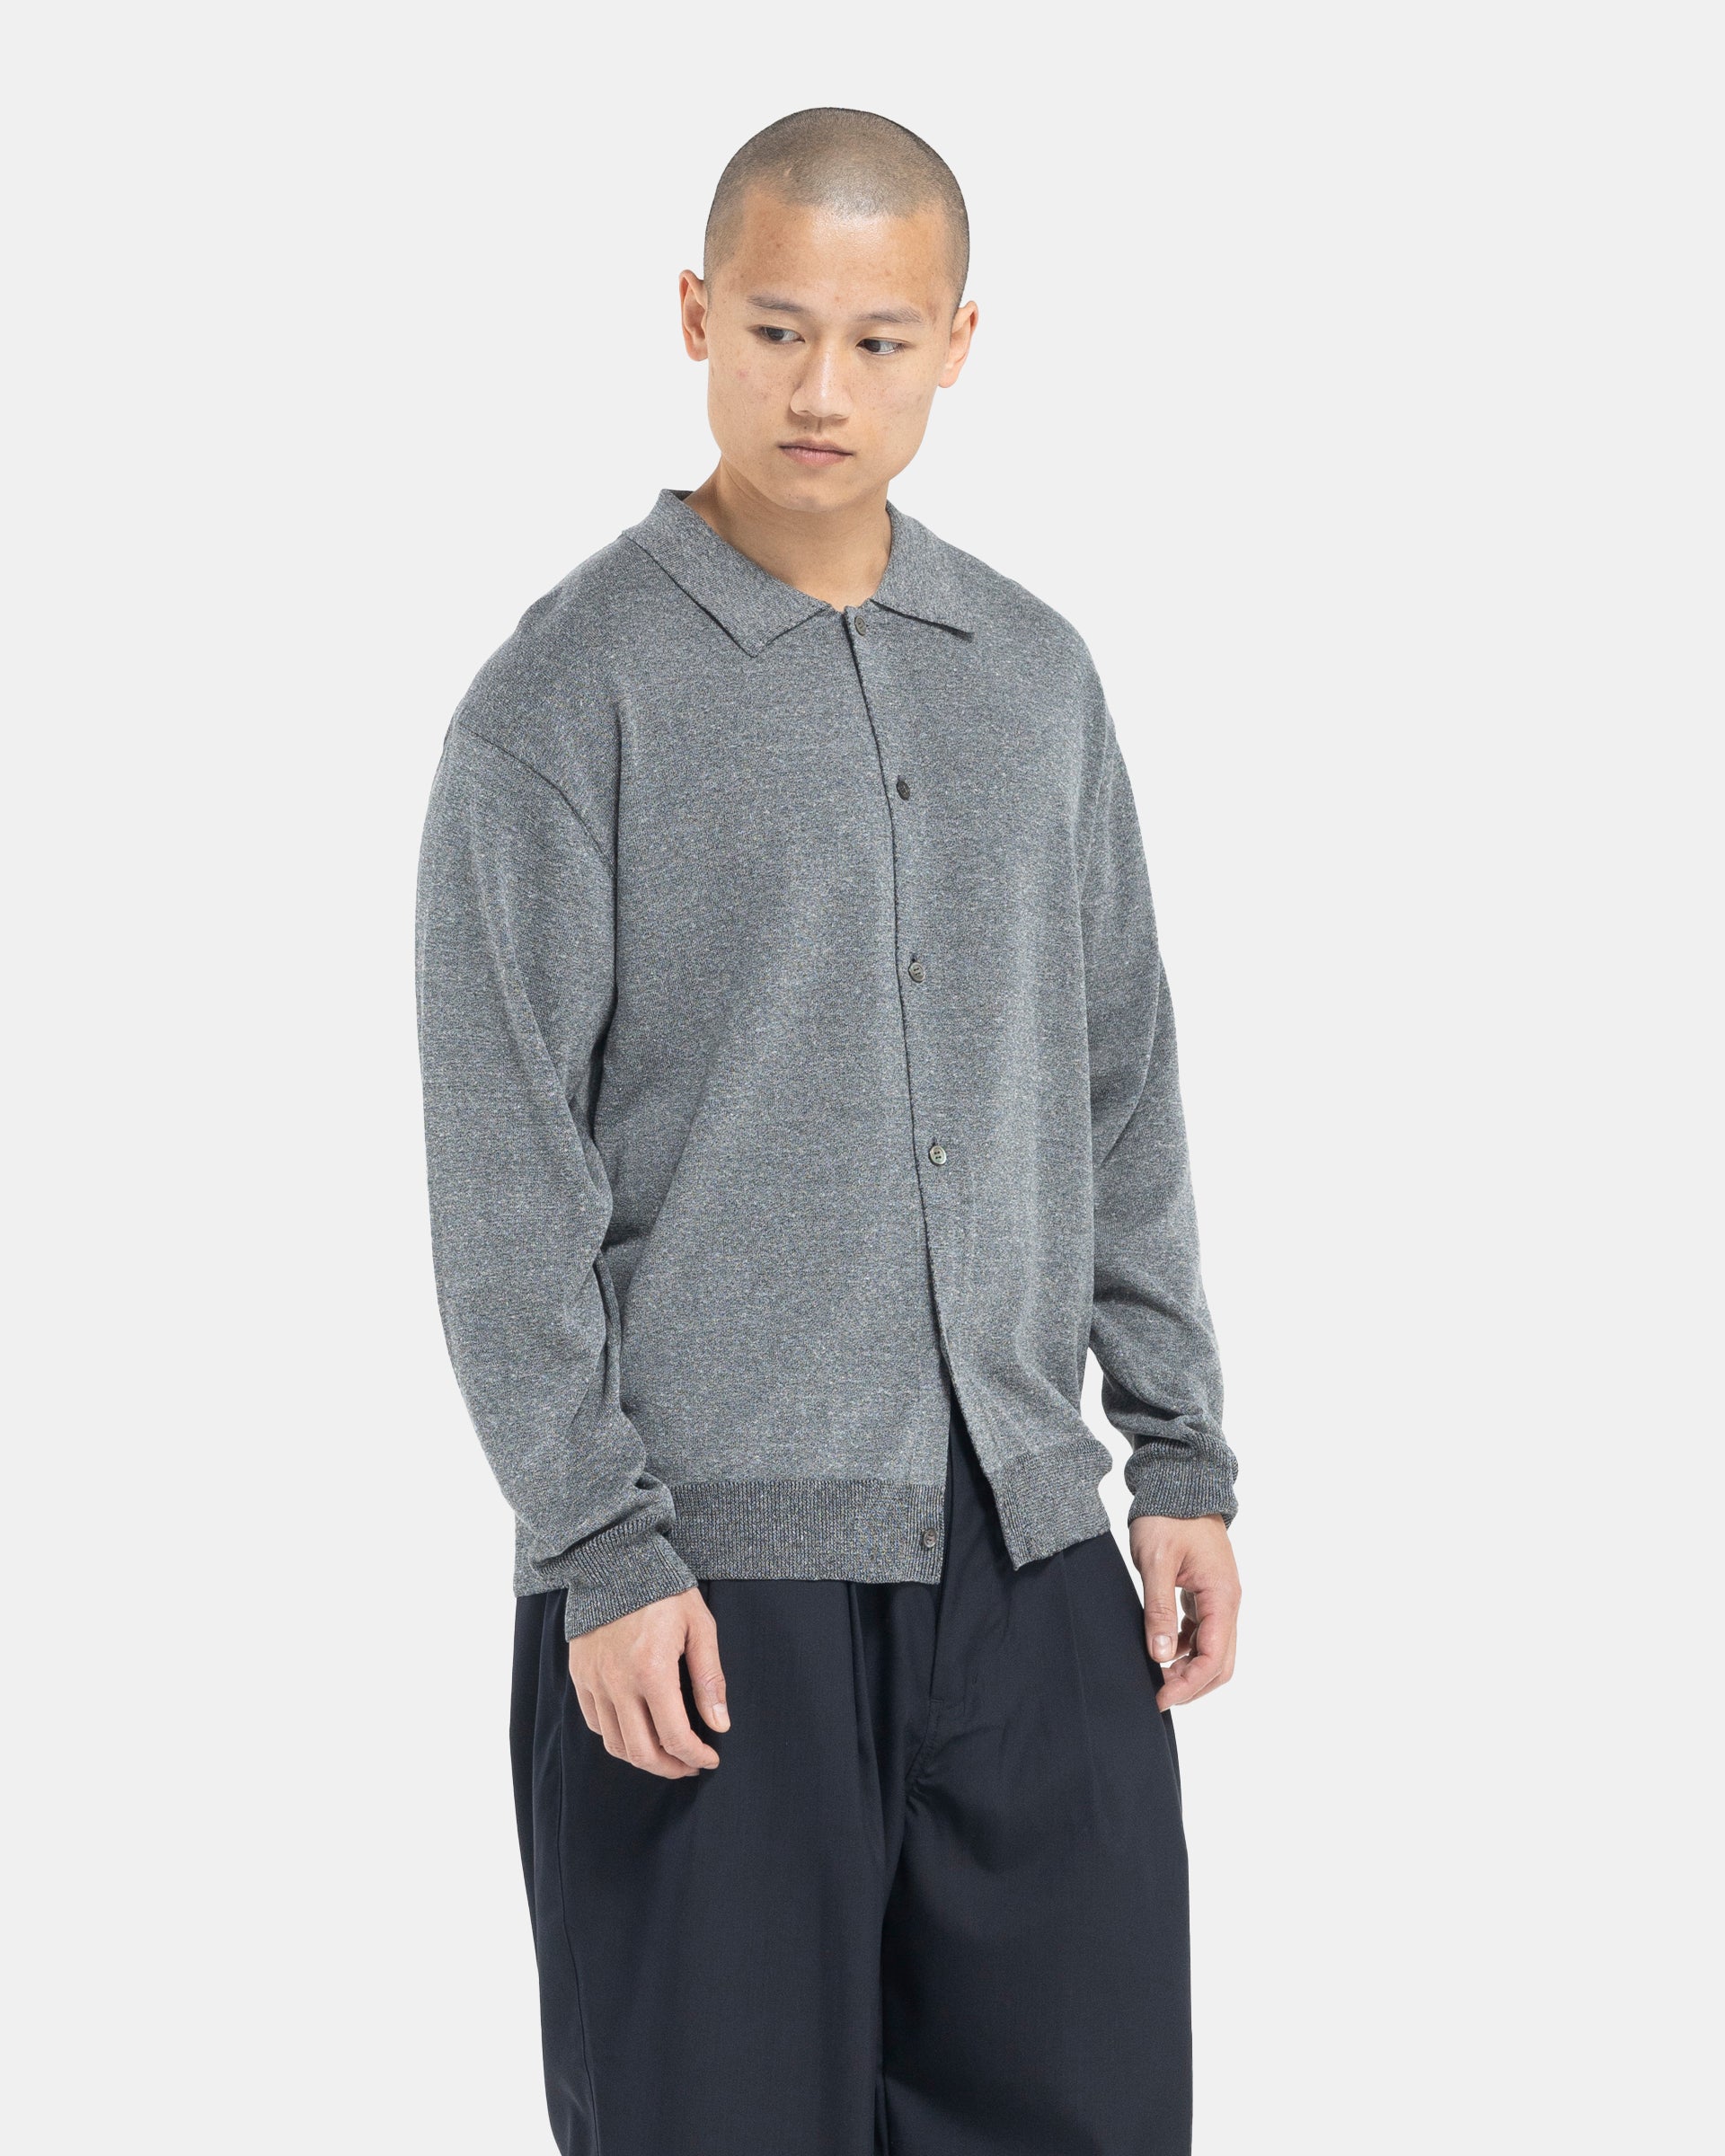 Male model wearing grey Still By Hand polo cardigan on white background